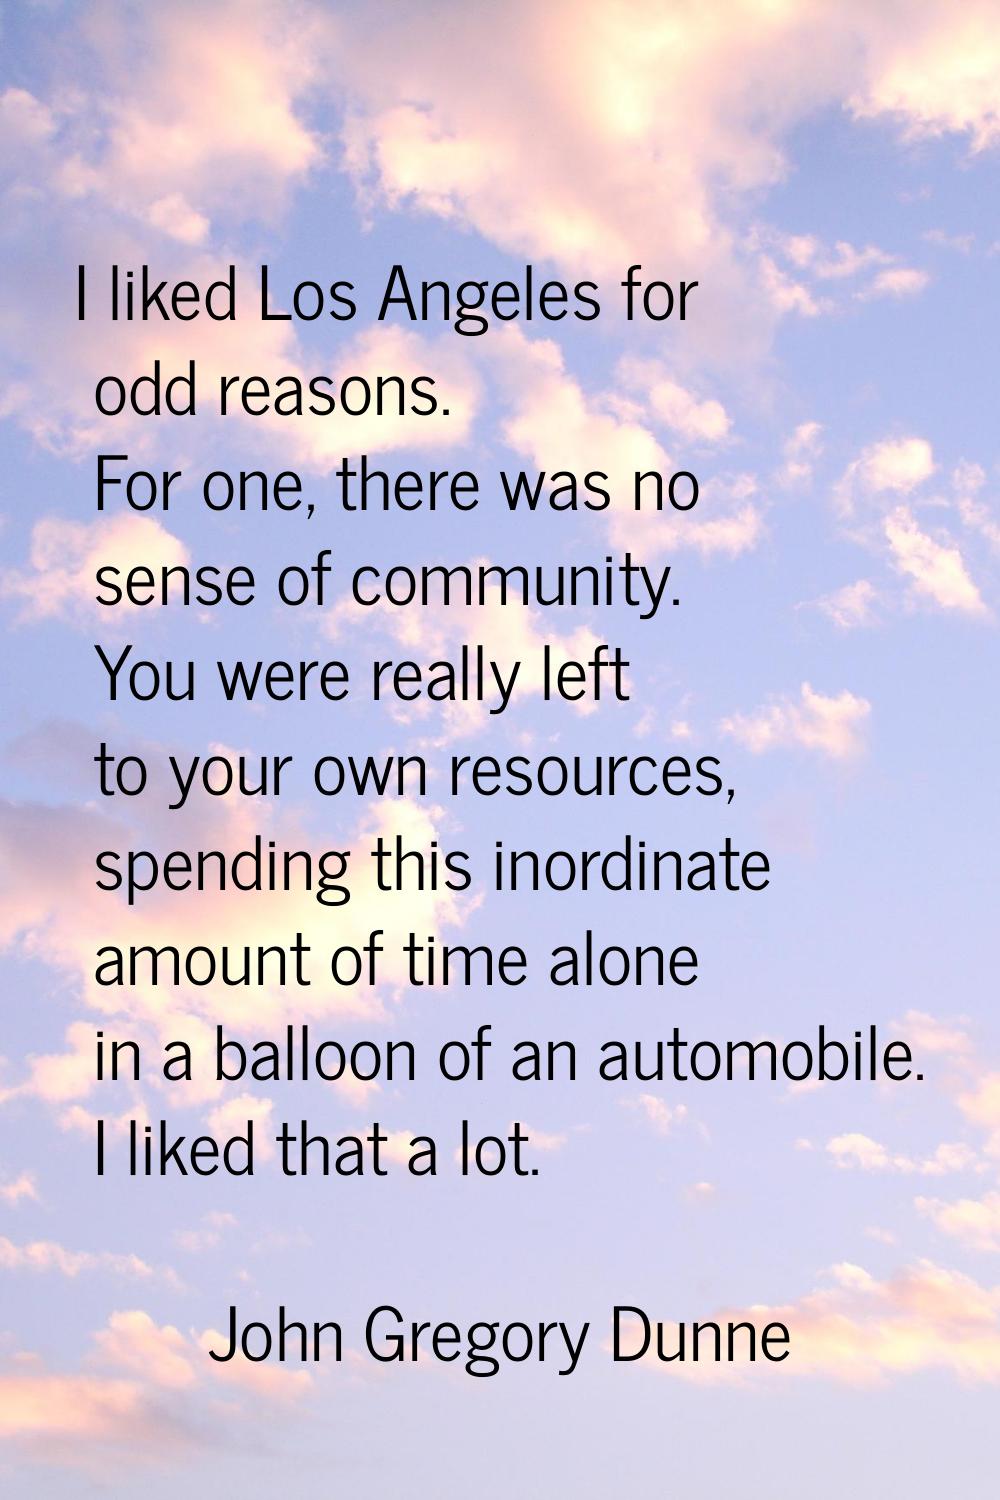 I liked Los Angeles for odd reasons. For one, there was no sense of community. You were really left